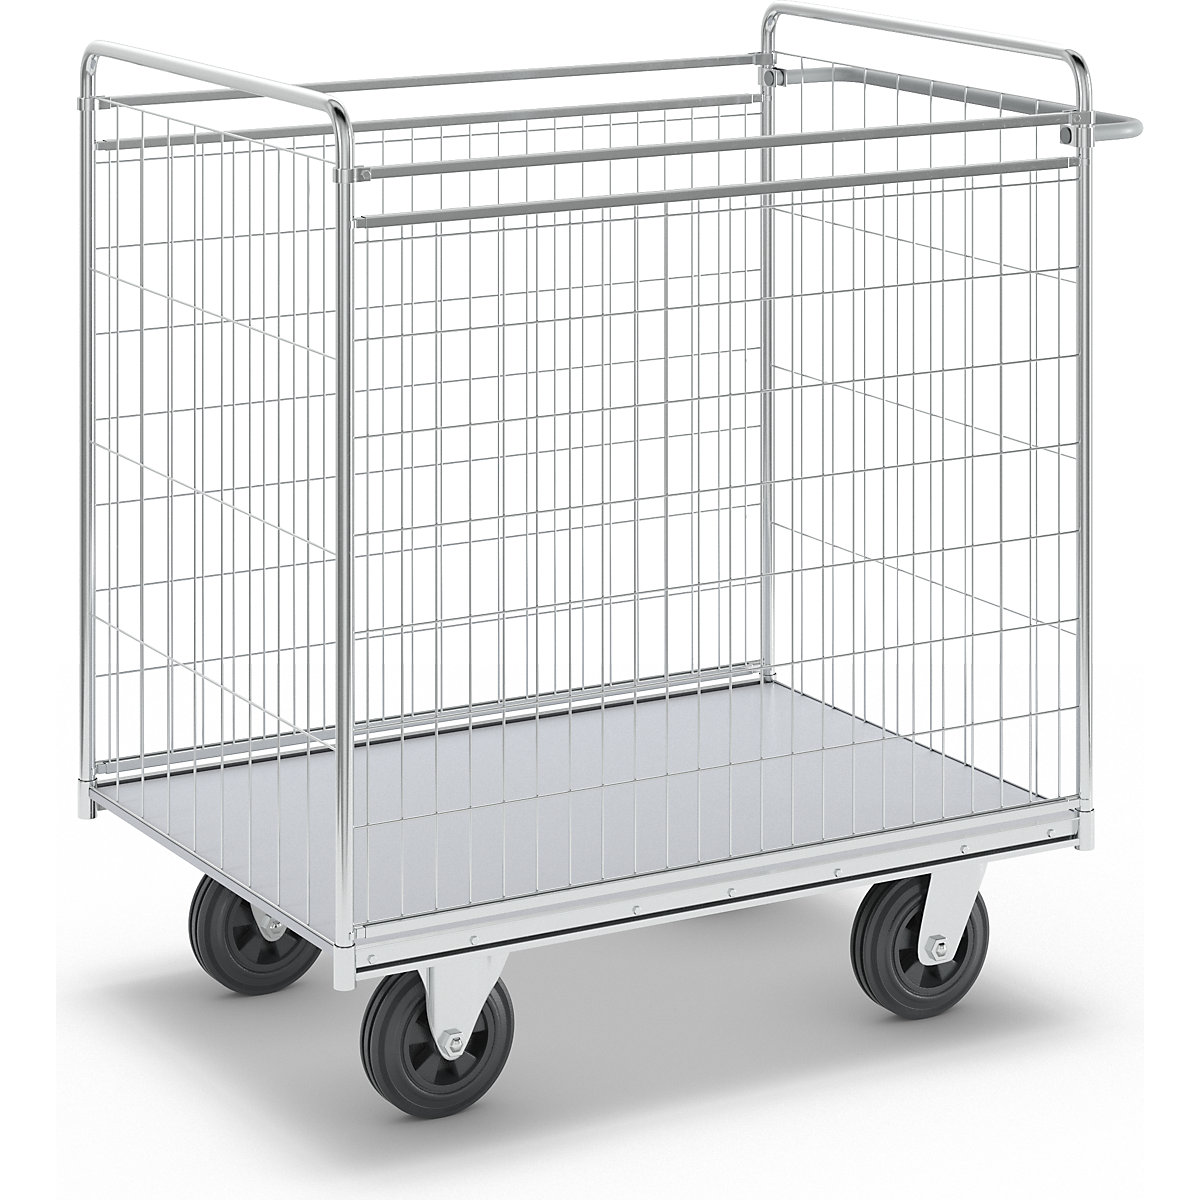 SERIES 300 four-sided trolley – HelgeNyberg, model 82, low, LxWxH 990 x 650 x 1030 mm-3